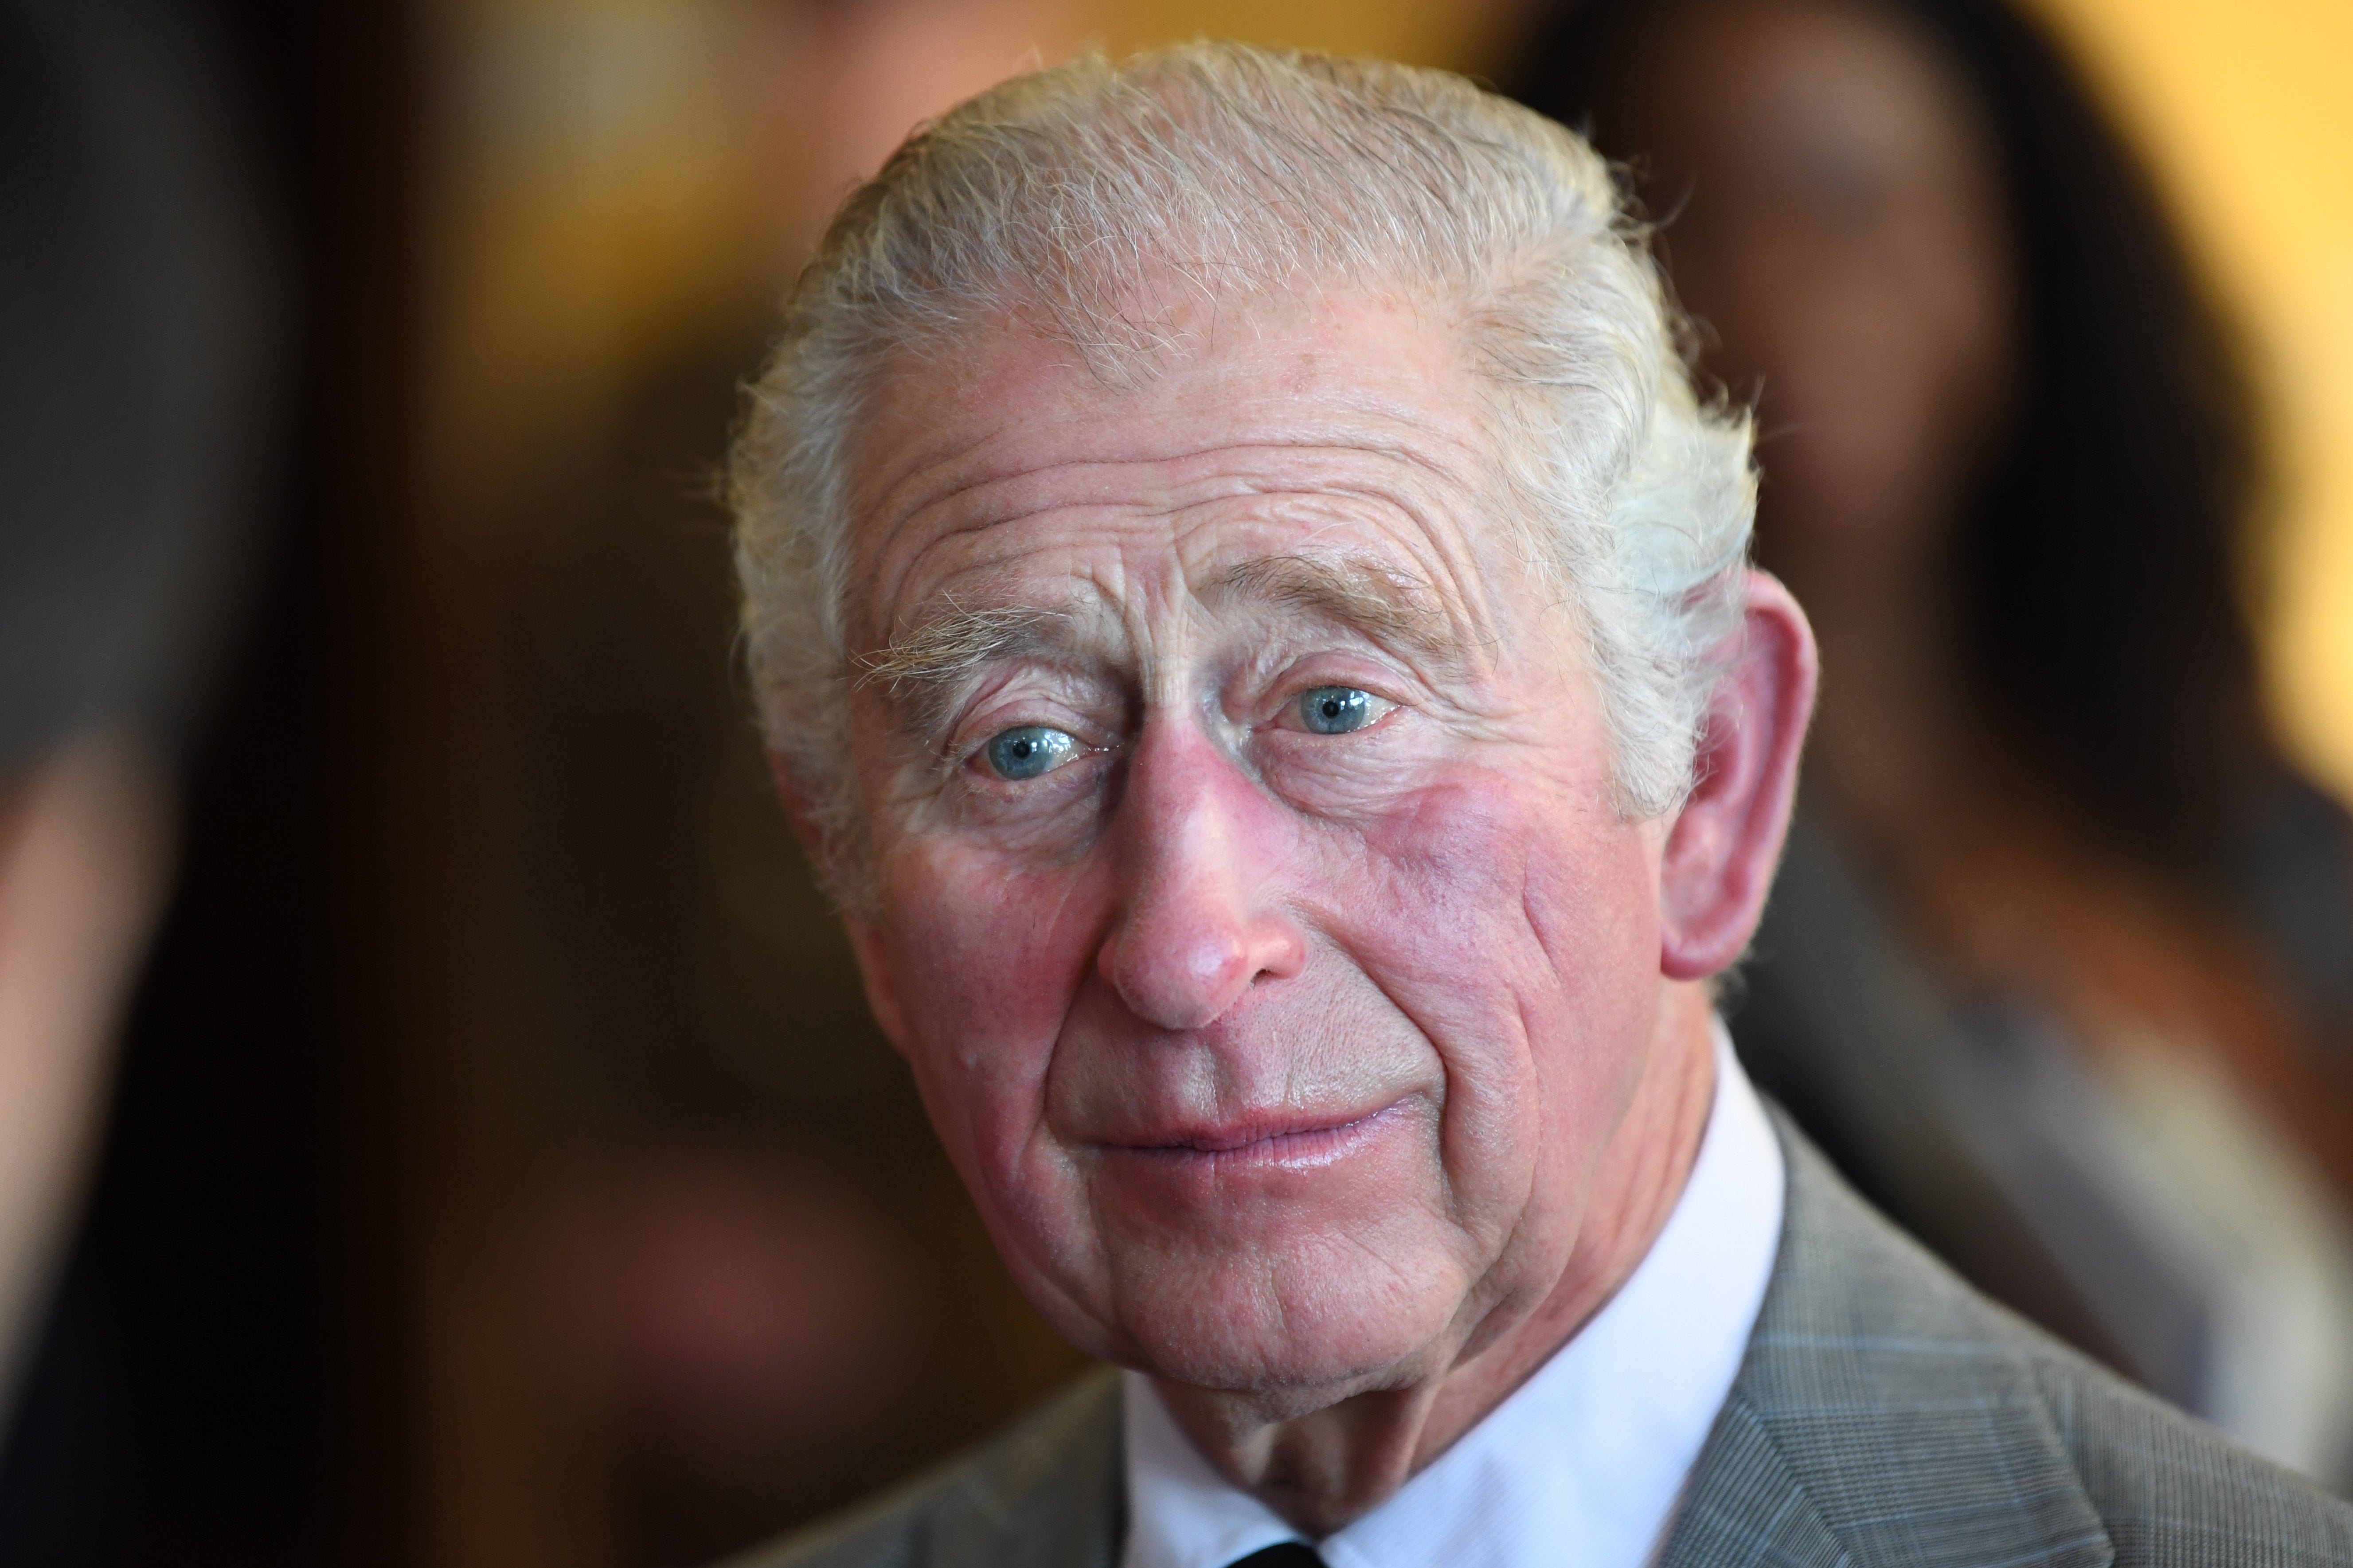 The Prince of Wales during a visit to Homerton College at the University of Cambridge, to discuss access to education and learn of the college’s vision to welcome and support students from diverse backgrounds (Daniel Leal/PA)